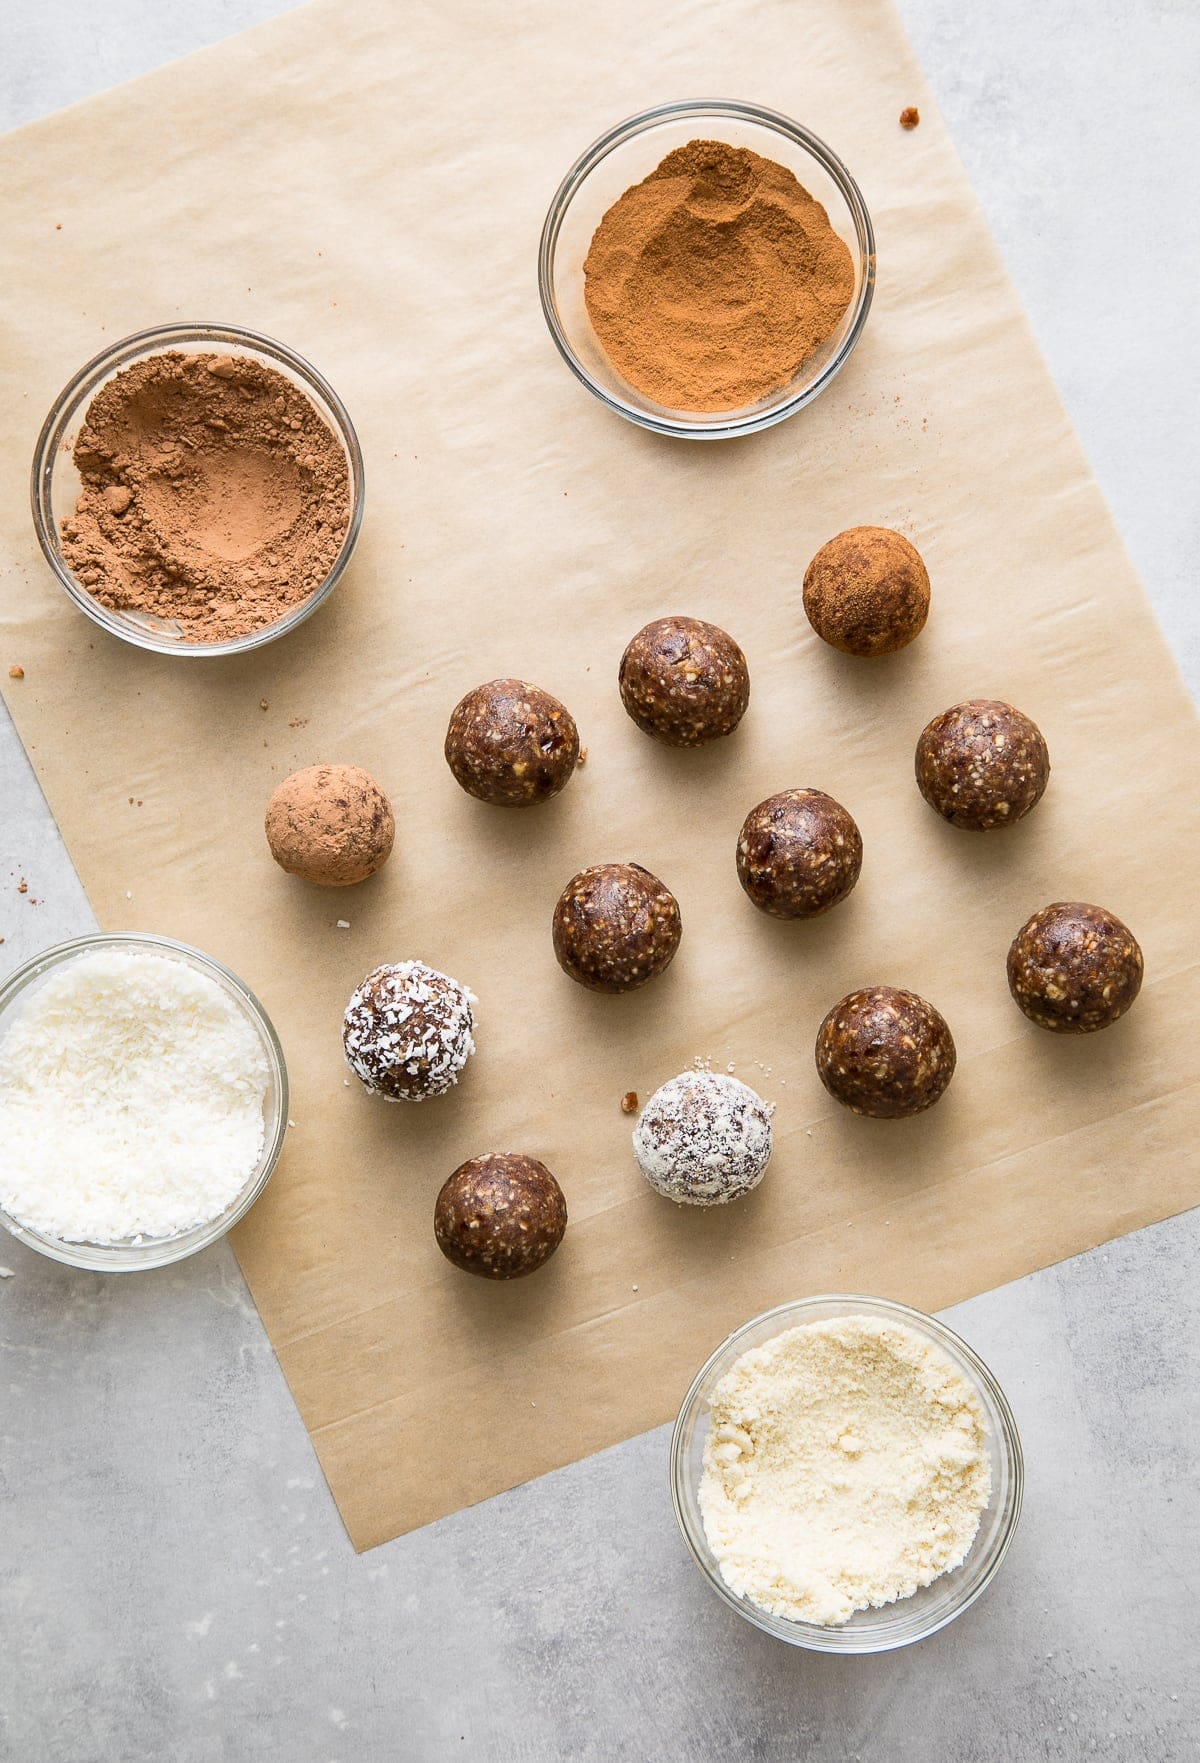 top down view showing the process of rolling energy balls in cocoa, cinnamon and coconut.